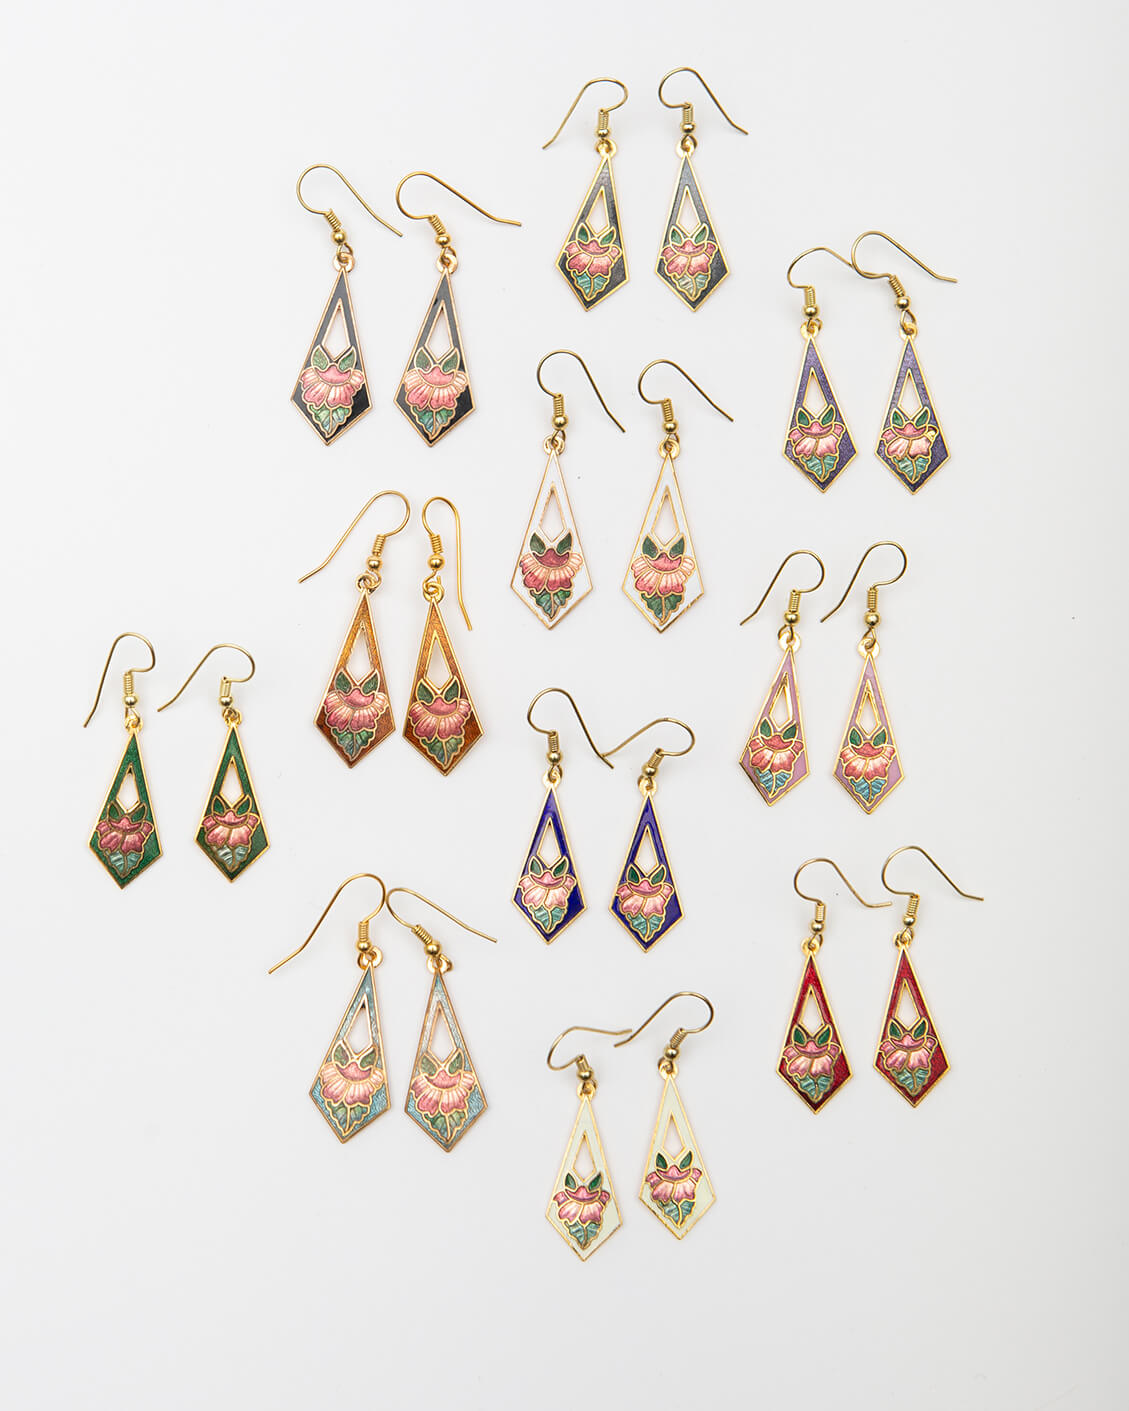 Cloisonné Diamond Floral Earrings in many various colorways